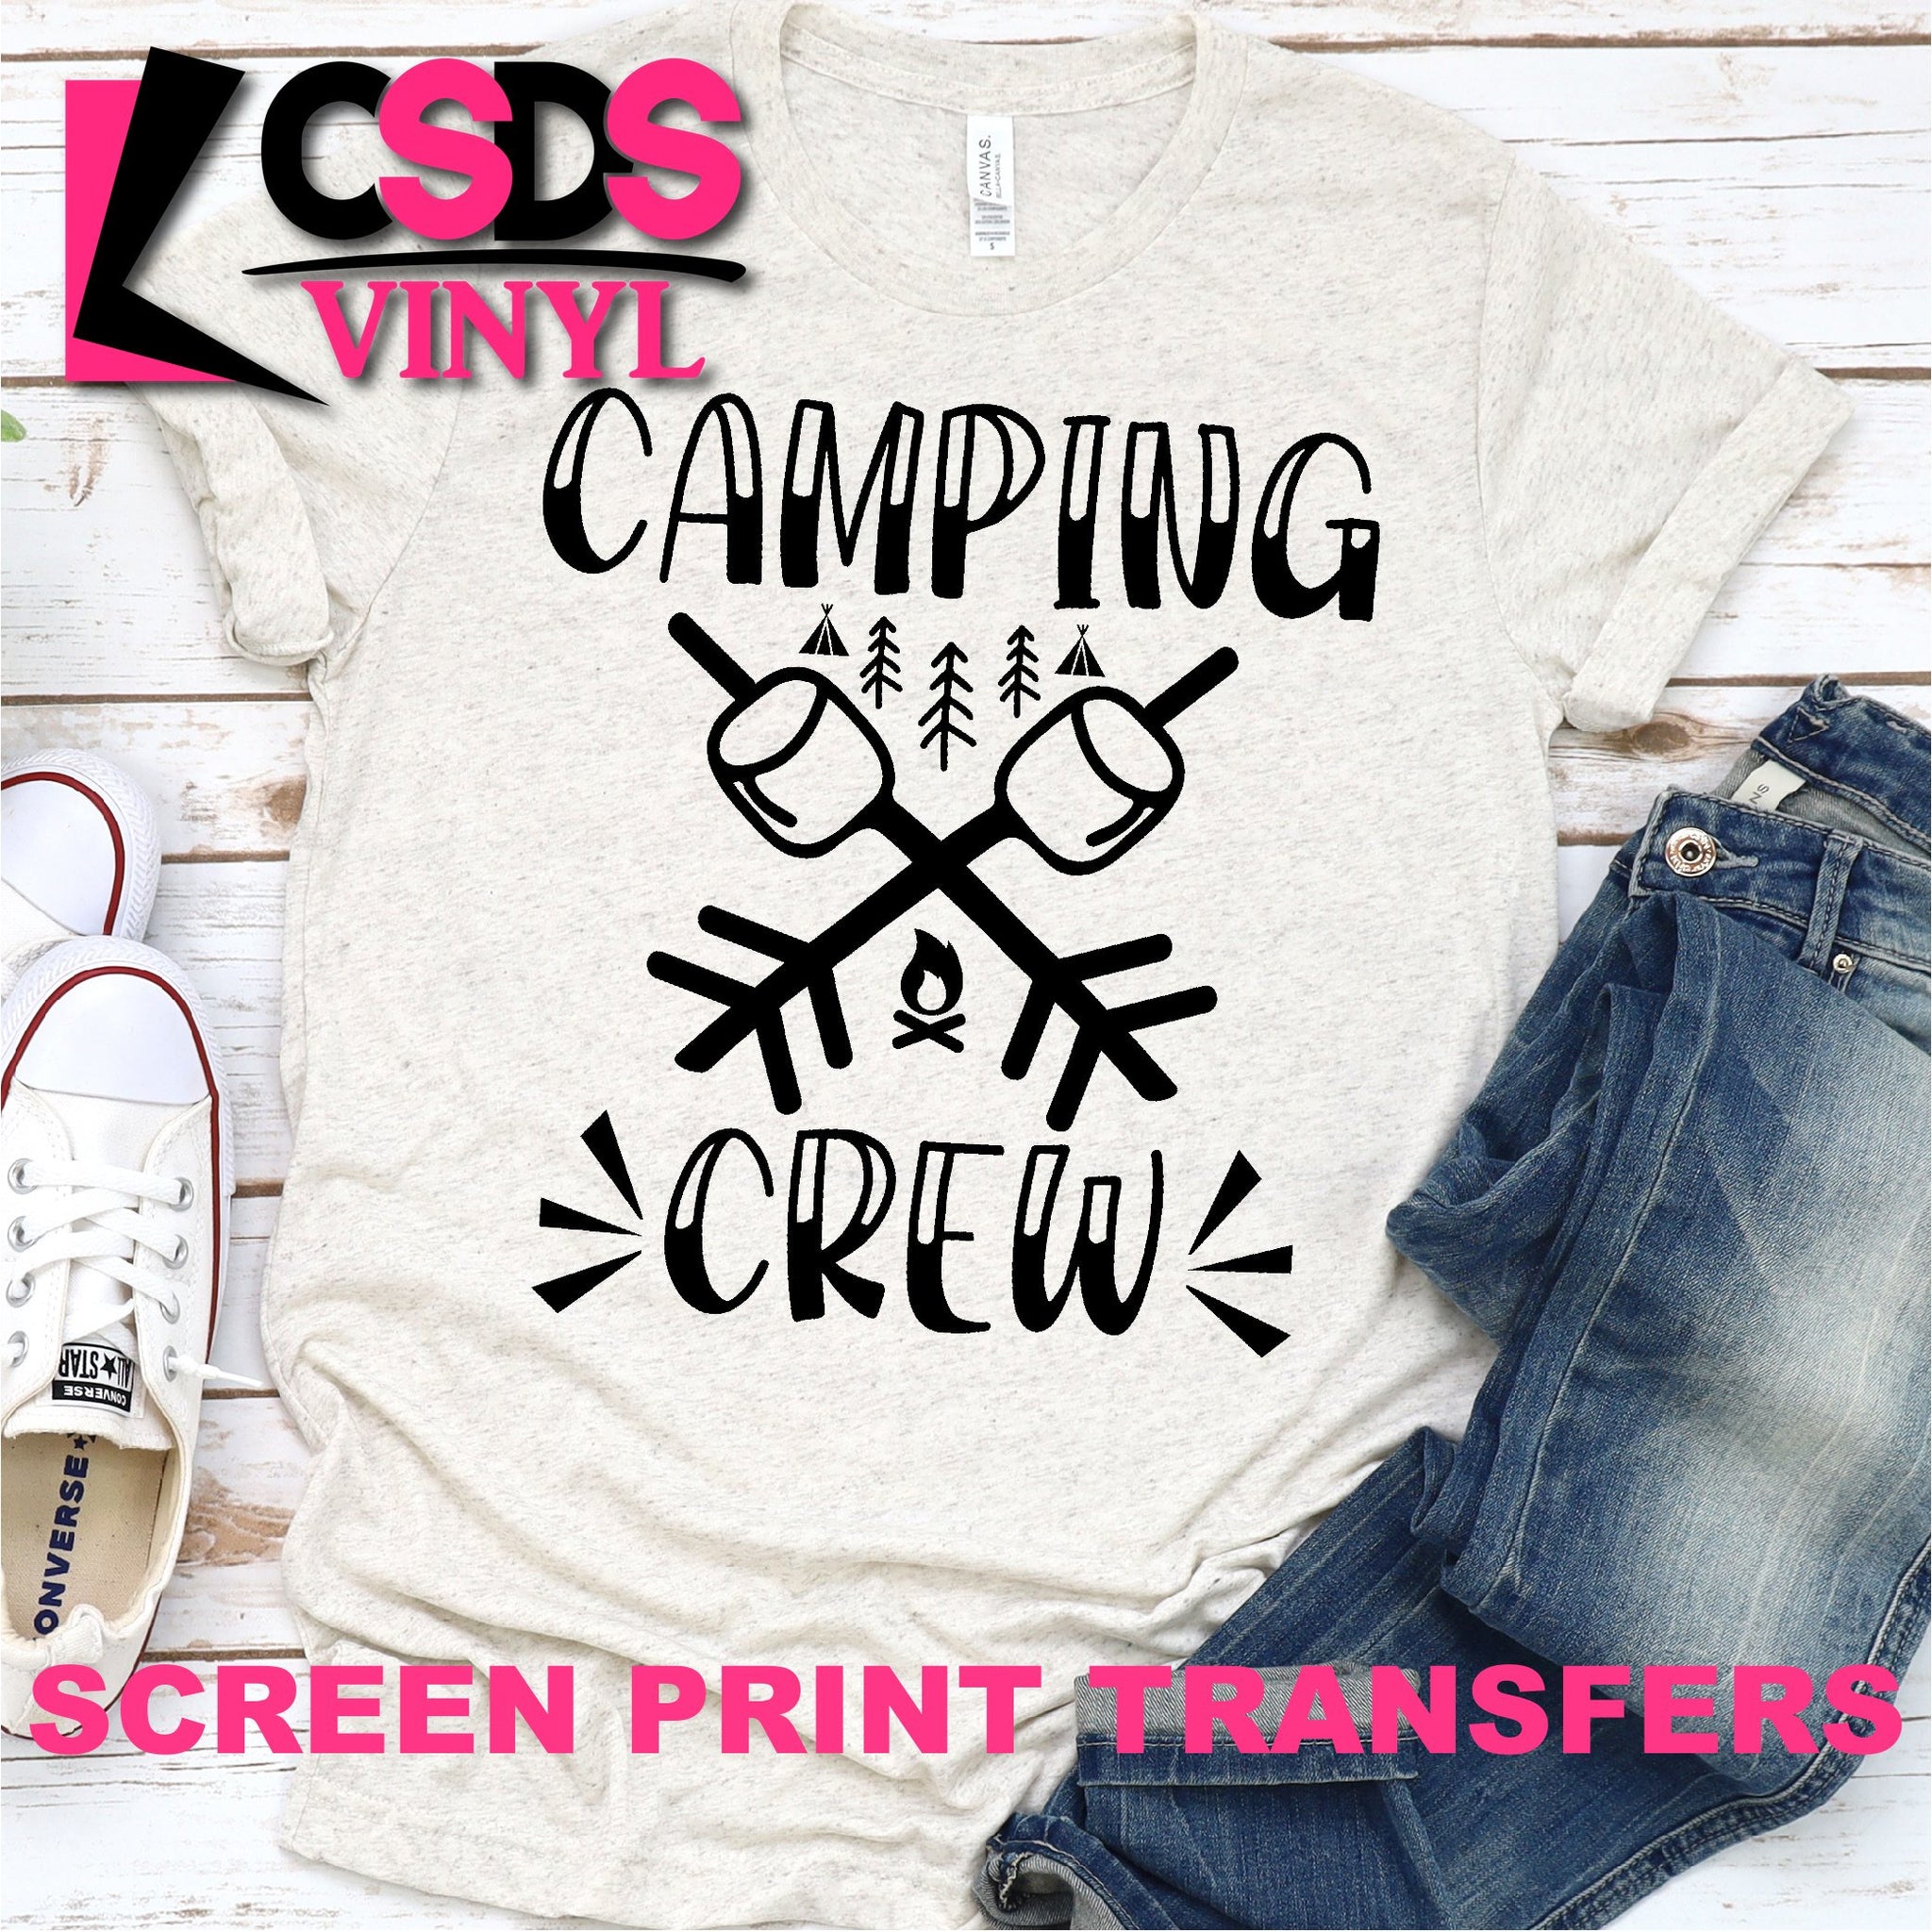 Free Free 97 Camping Crew Svg SVG PNG EPS DXF File